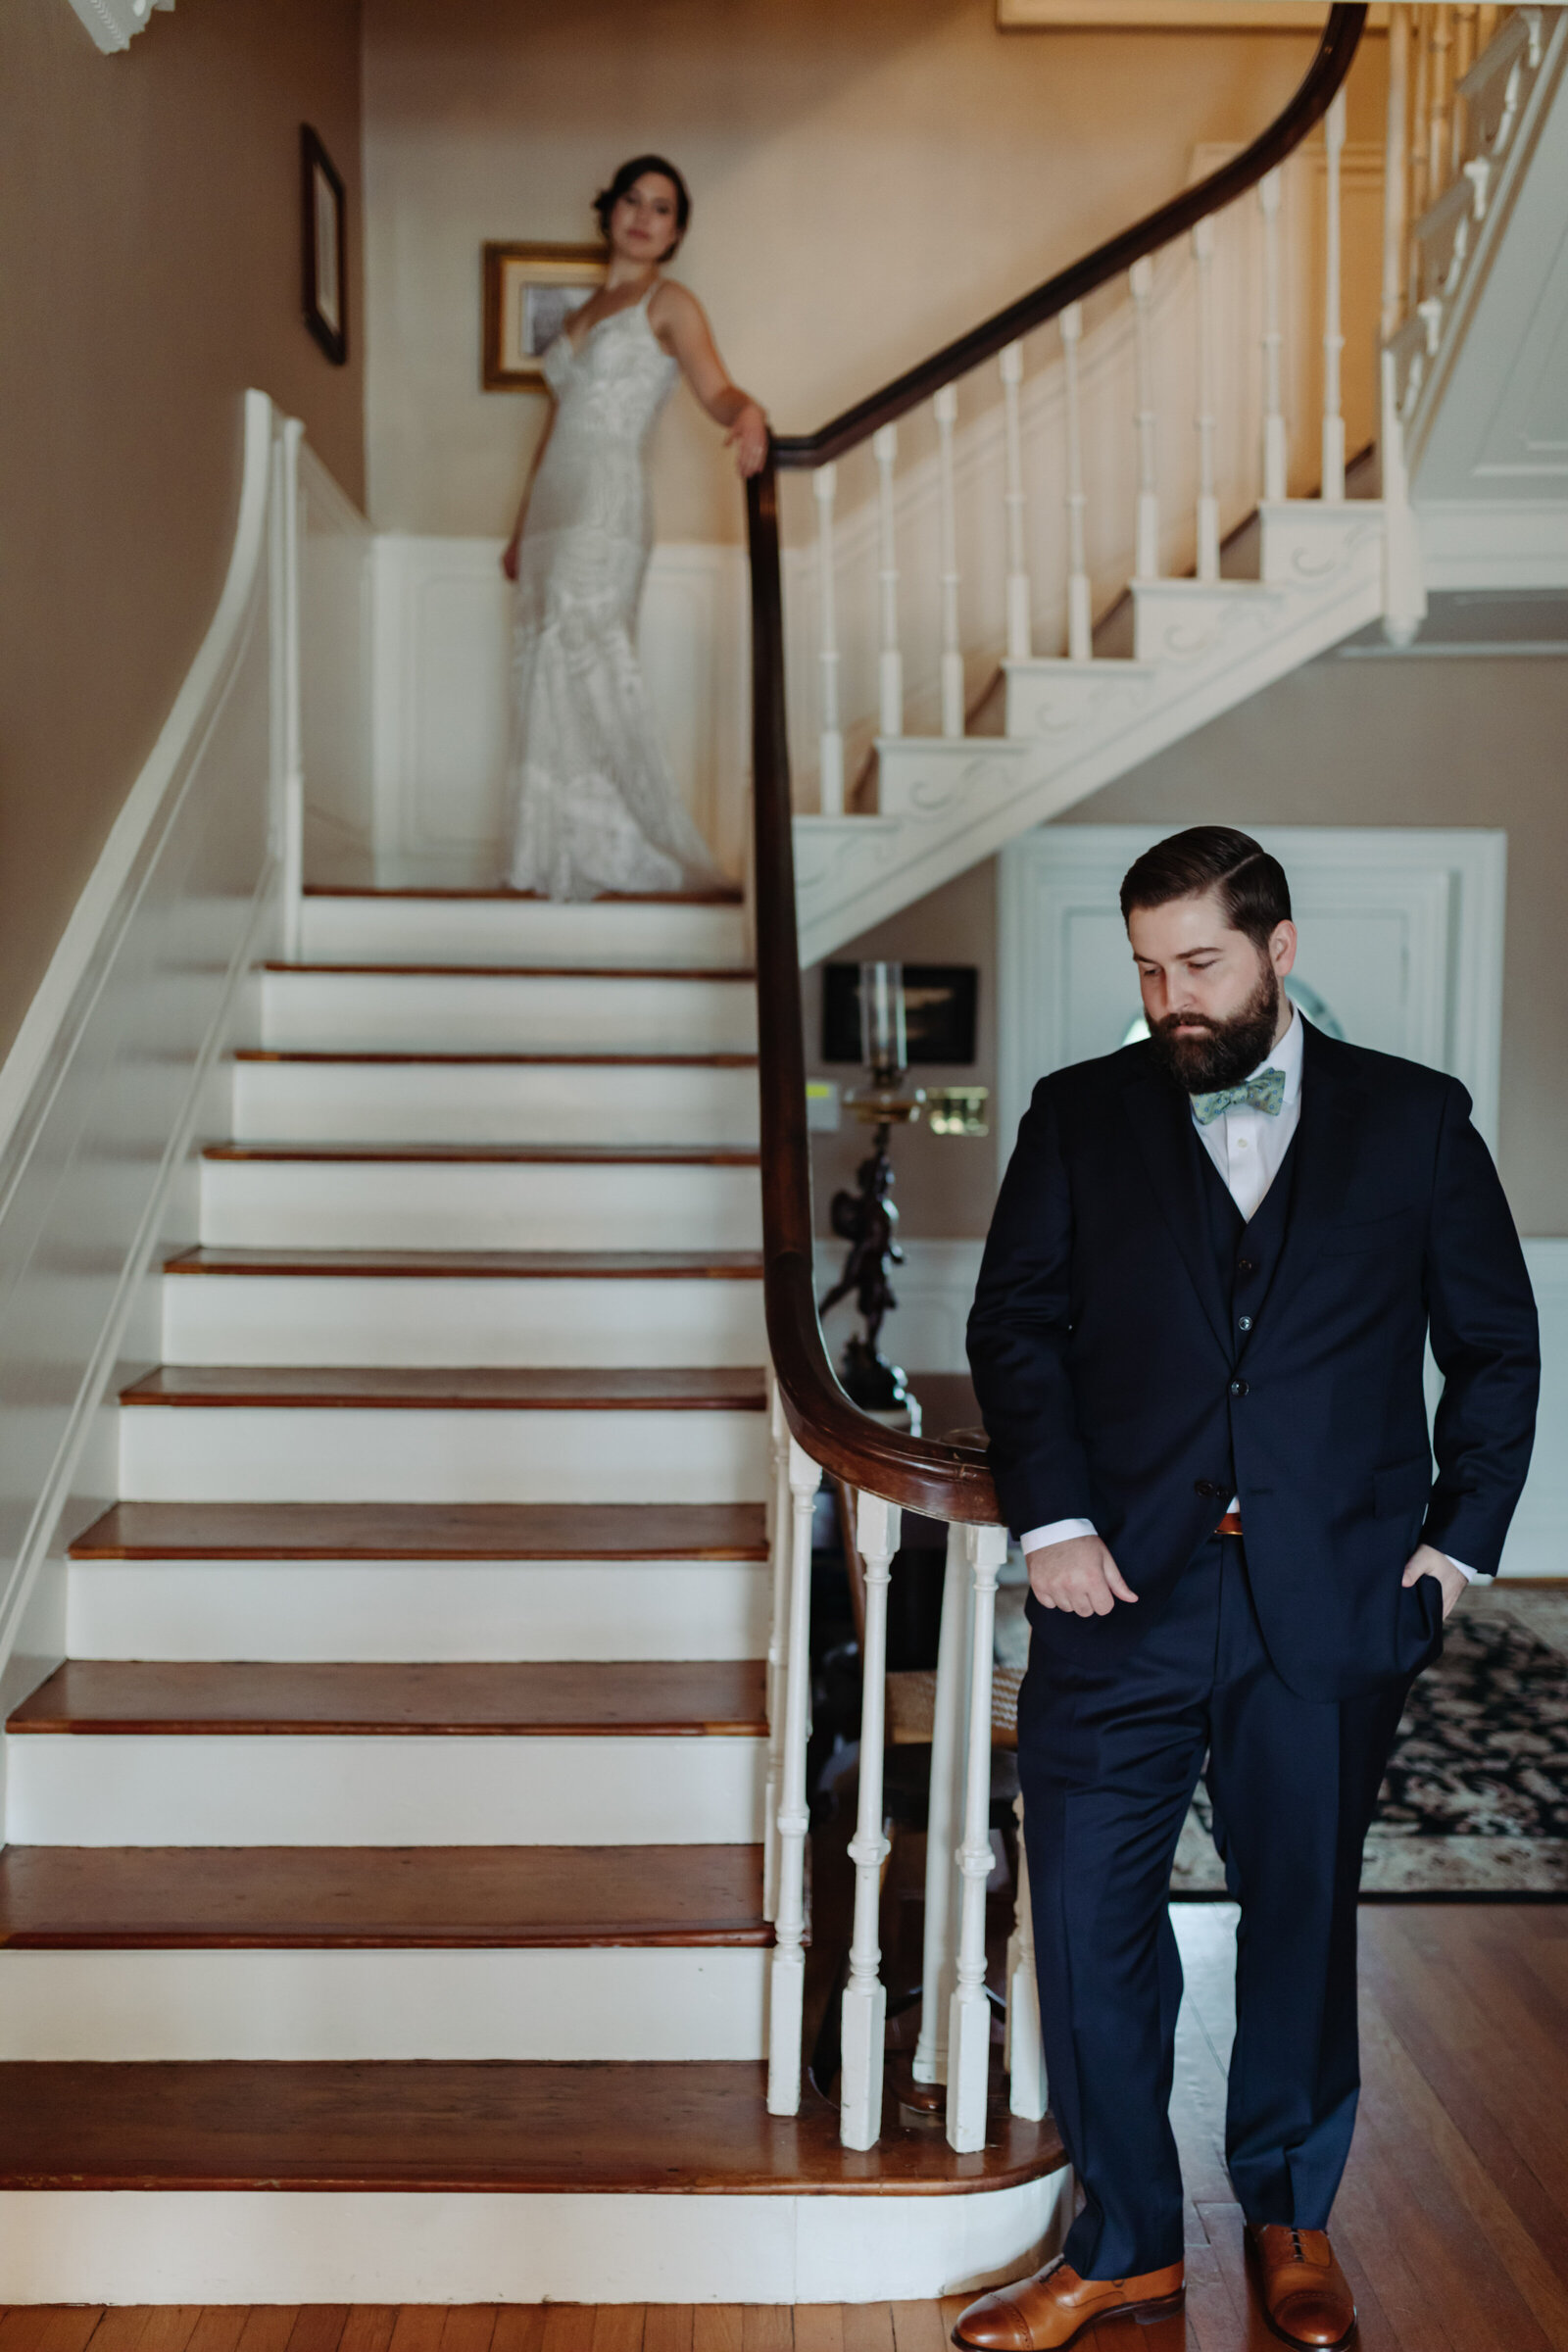 A bride stands at the top of a grand staircase with the groom at the bottom